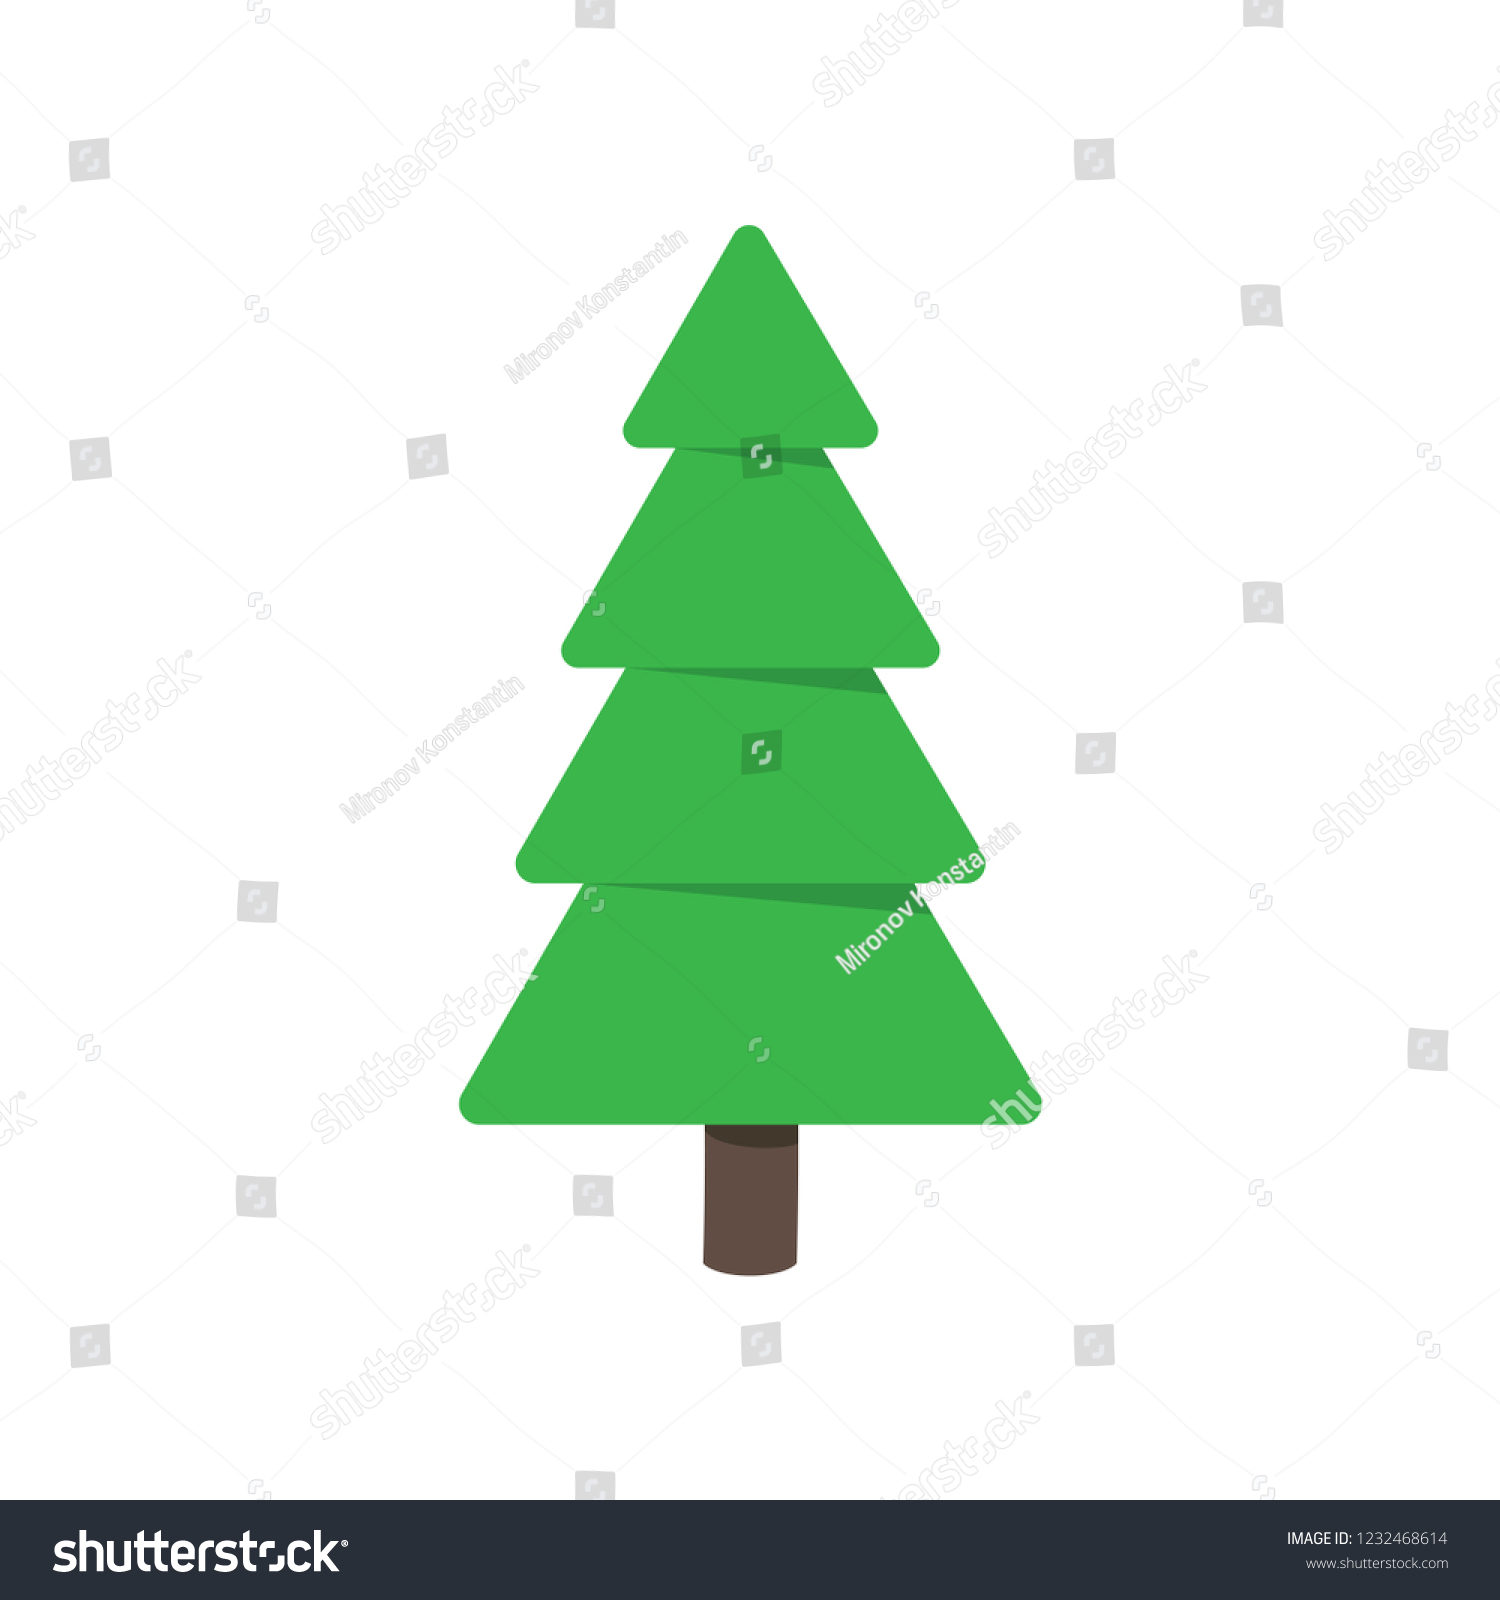 Christmas tree fir flat style design icon sign vector illustration. Symbol of family xmas holiday celebration isolated on white background.  Simple shape for holyday. Merry christmas, happy new year #1232468614